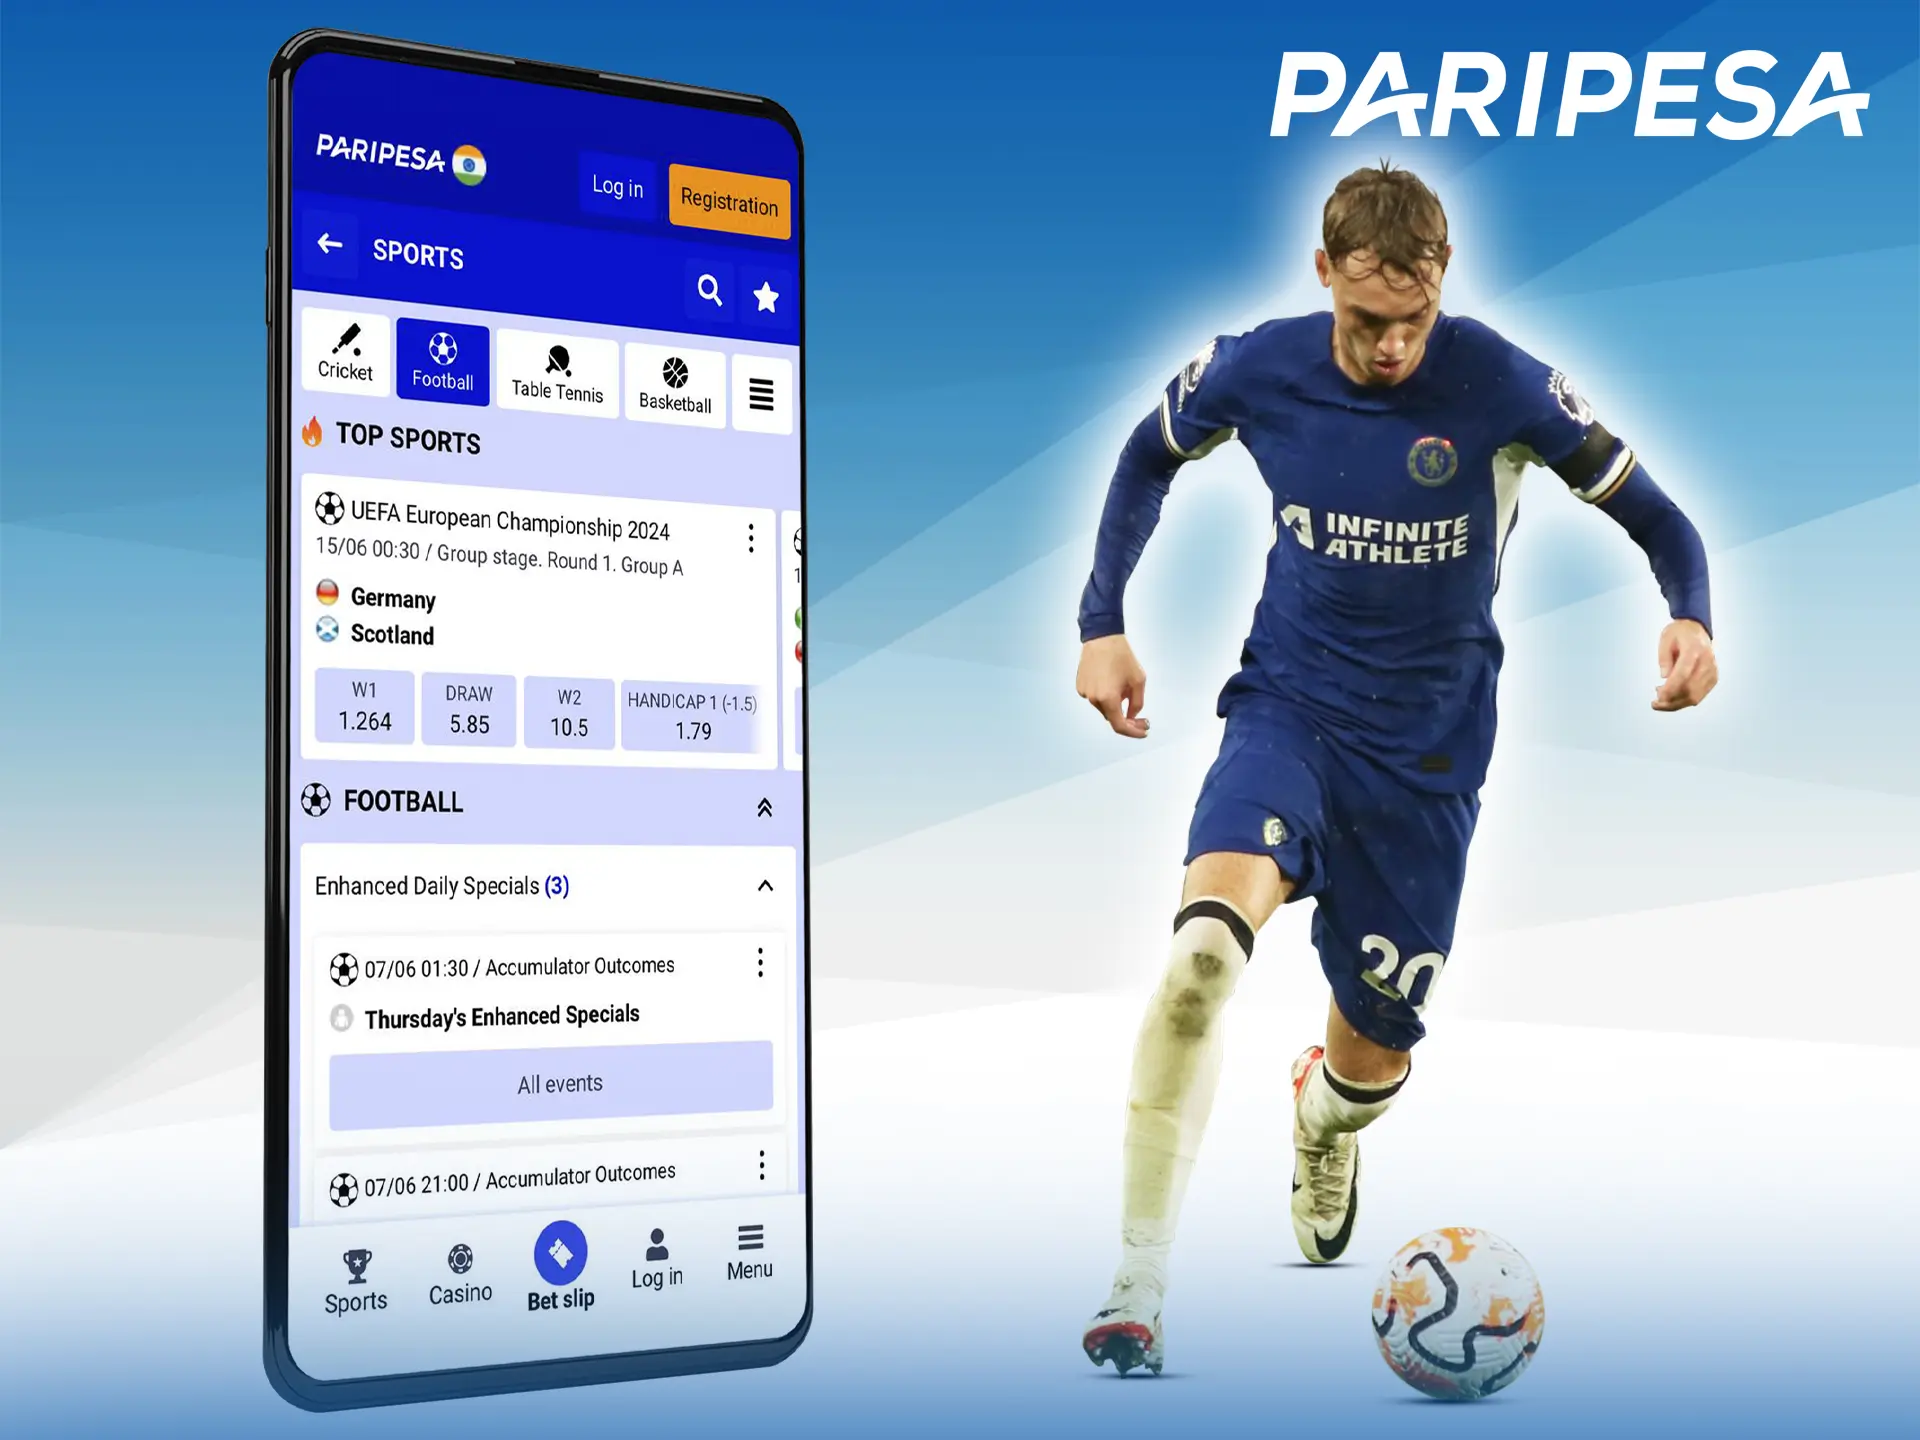 The Paripesa app gives you regular match statistics updates and favourable conditions when betting on football.